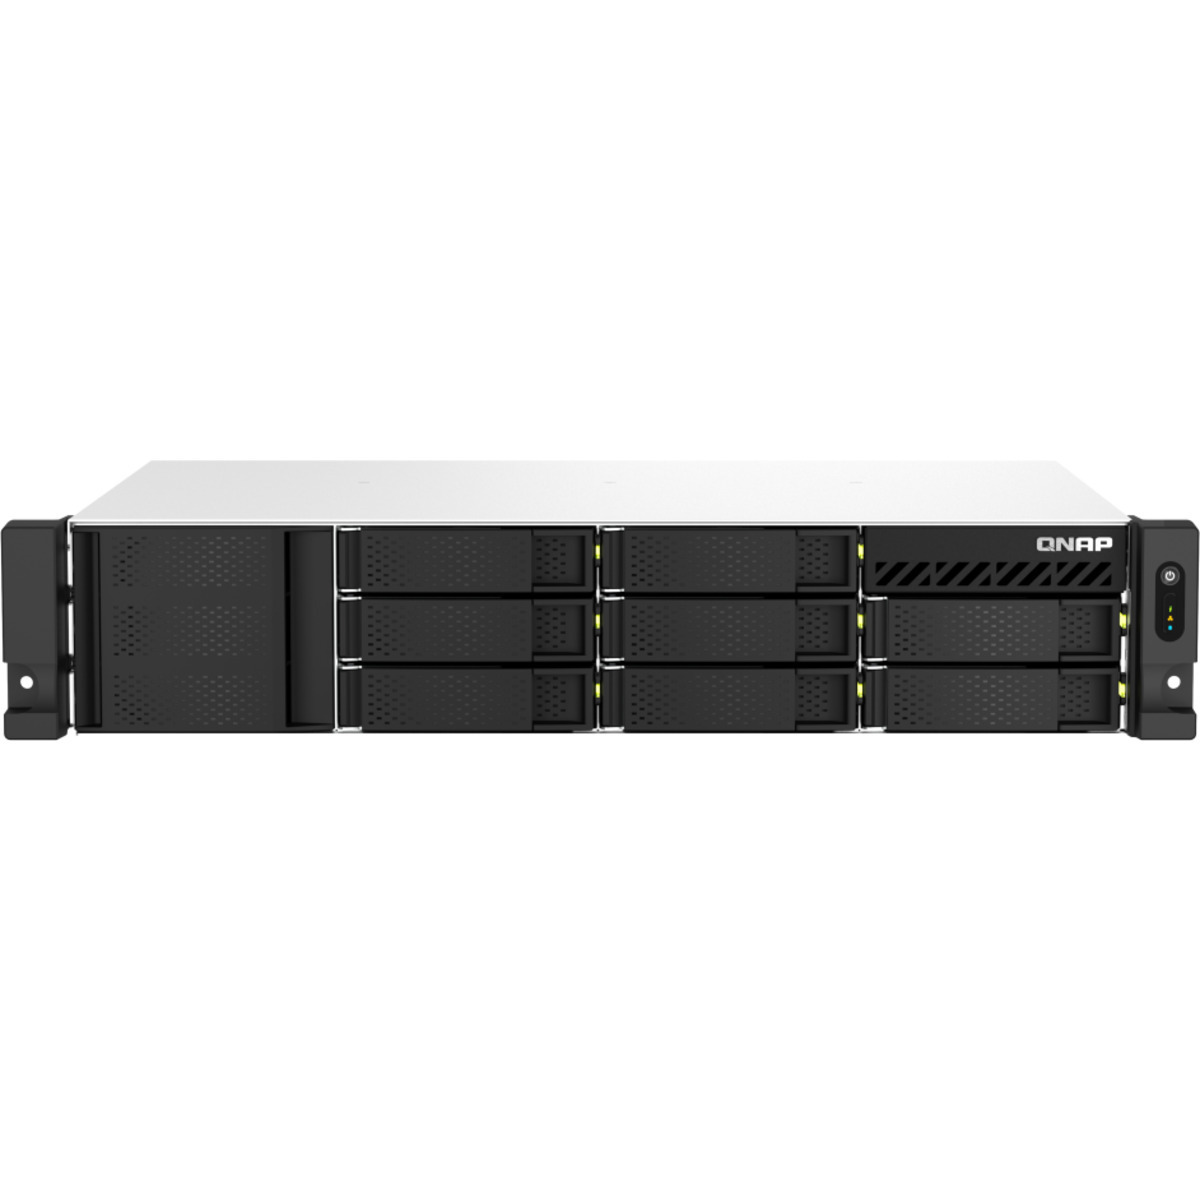 QNAP TS-873AeU 48tb 8-Bay RackMount Multimedia / Power User / Business NAS - Network Attached Storage Device 4x12tb Seagate IronWolf Pro ST12000NT001 3.5 7200rpm SATA 6Gb/s HDD NAS Class Drives Installed - Burn-In Tested - ON SALE - FREE RAM UPGRADE TS-873AeU